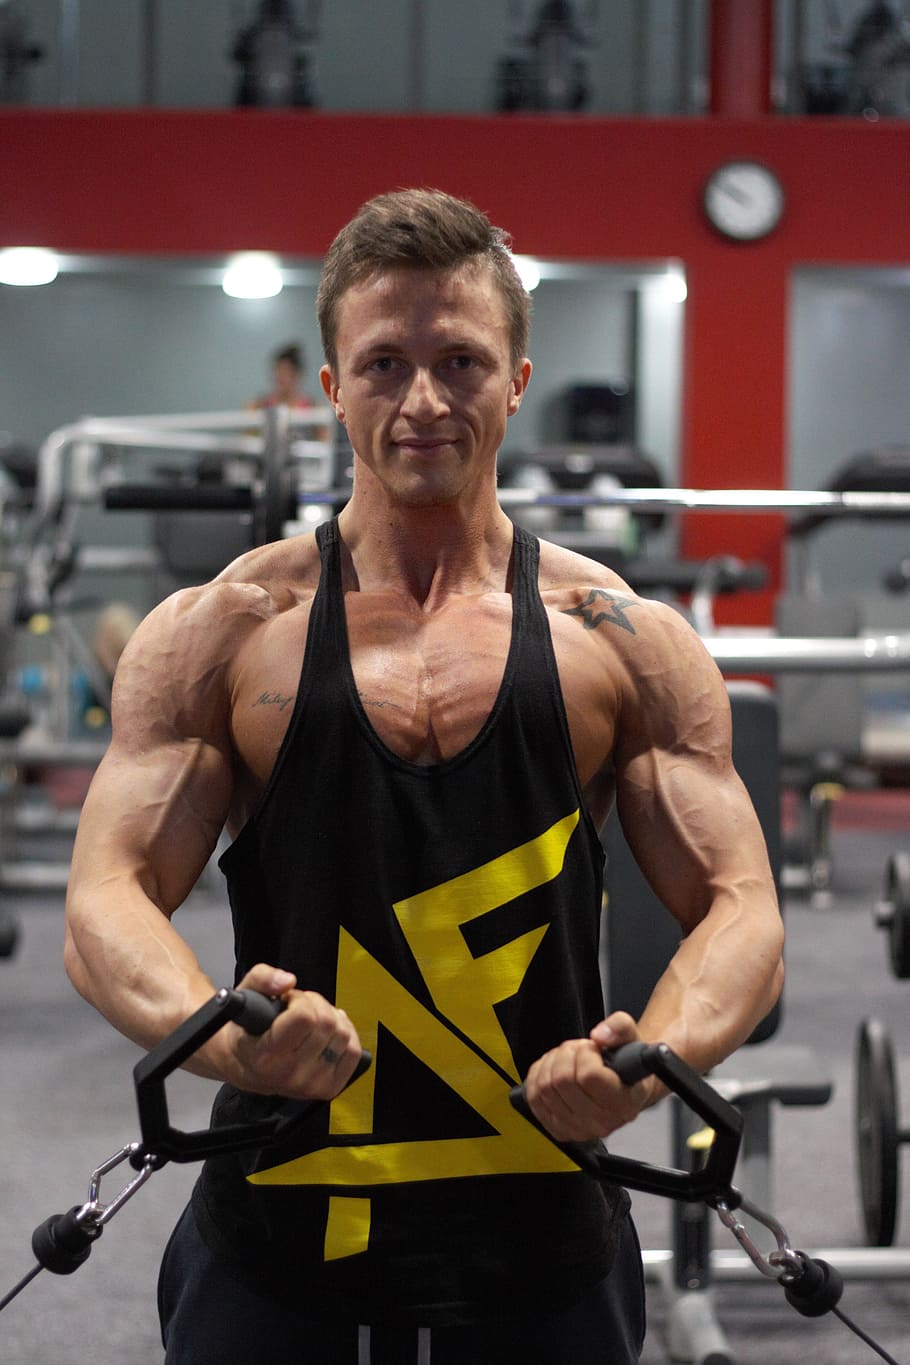 man wearing black and yellow tank top, Fitness, Exercise, strengthening